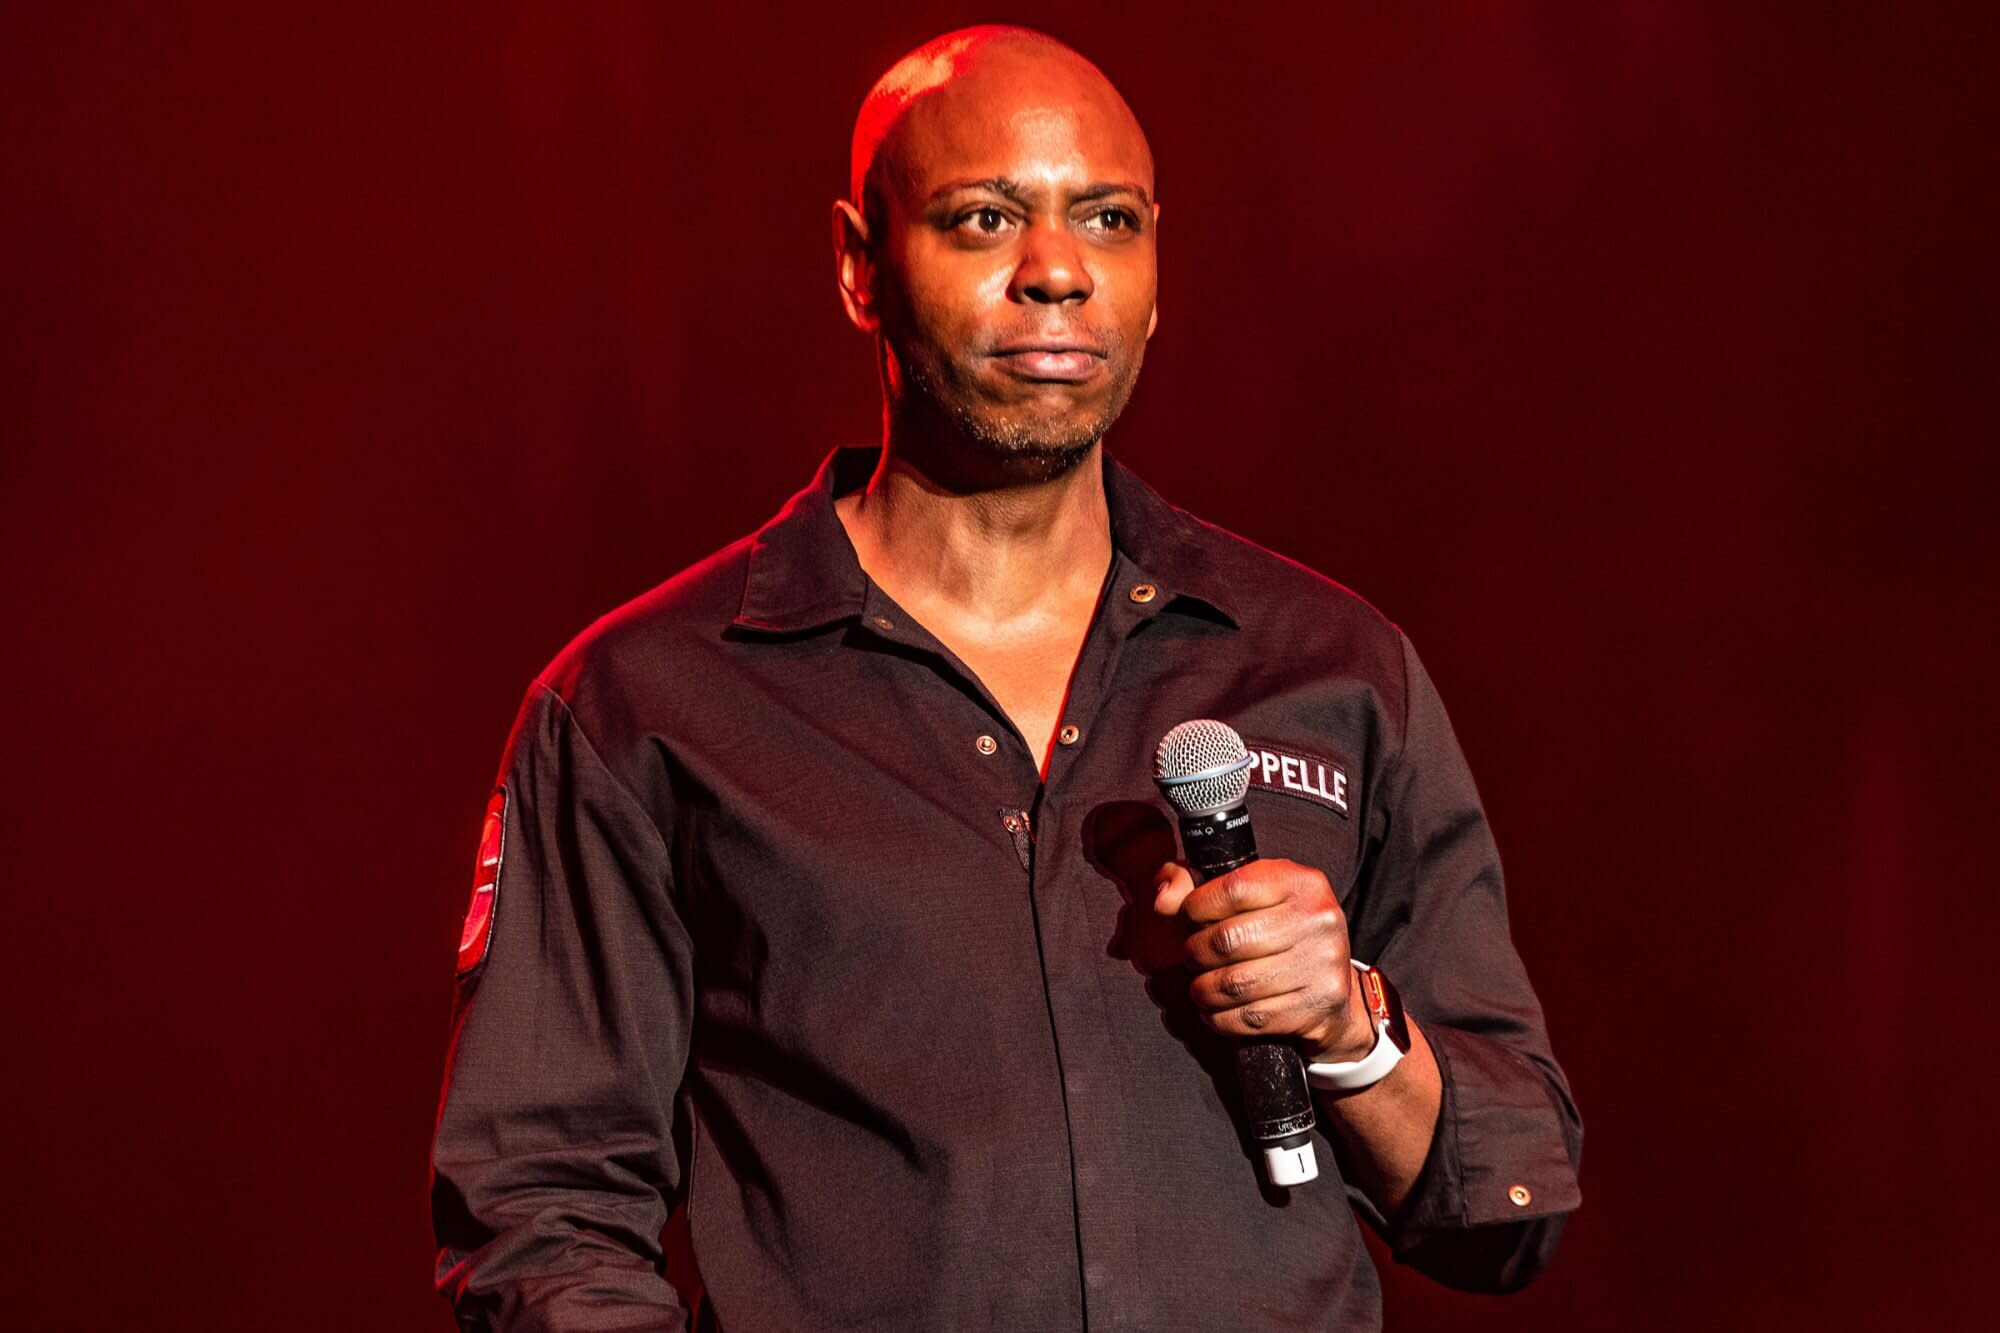 Dave Chappelle’s Remaining Comedy Shows Canceled Due to Potential COVID